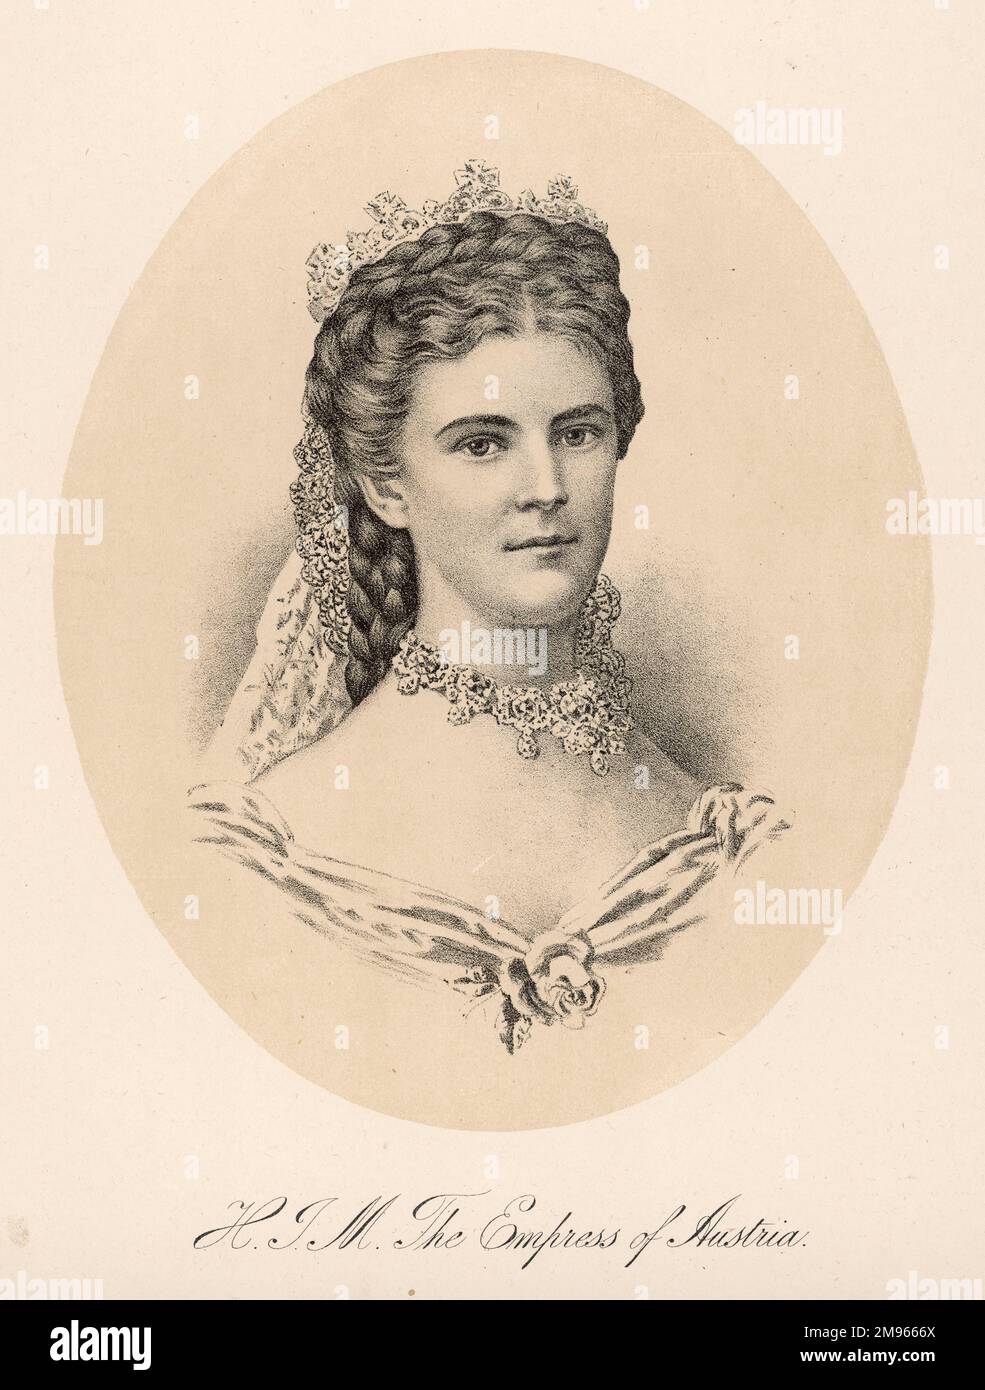 ELIZABETH, EMPRESS OF AUSTRIA Consort of Emperor Francis Joseph. Great beauty and proficient horsewoman.  Murdered by an Italian anarchist in Geneva. Stock Photo